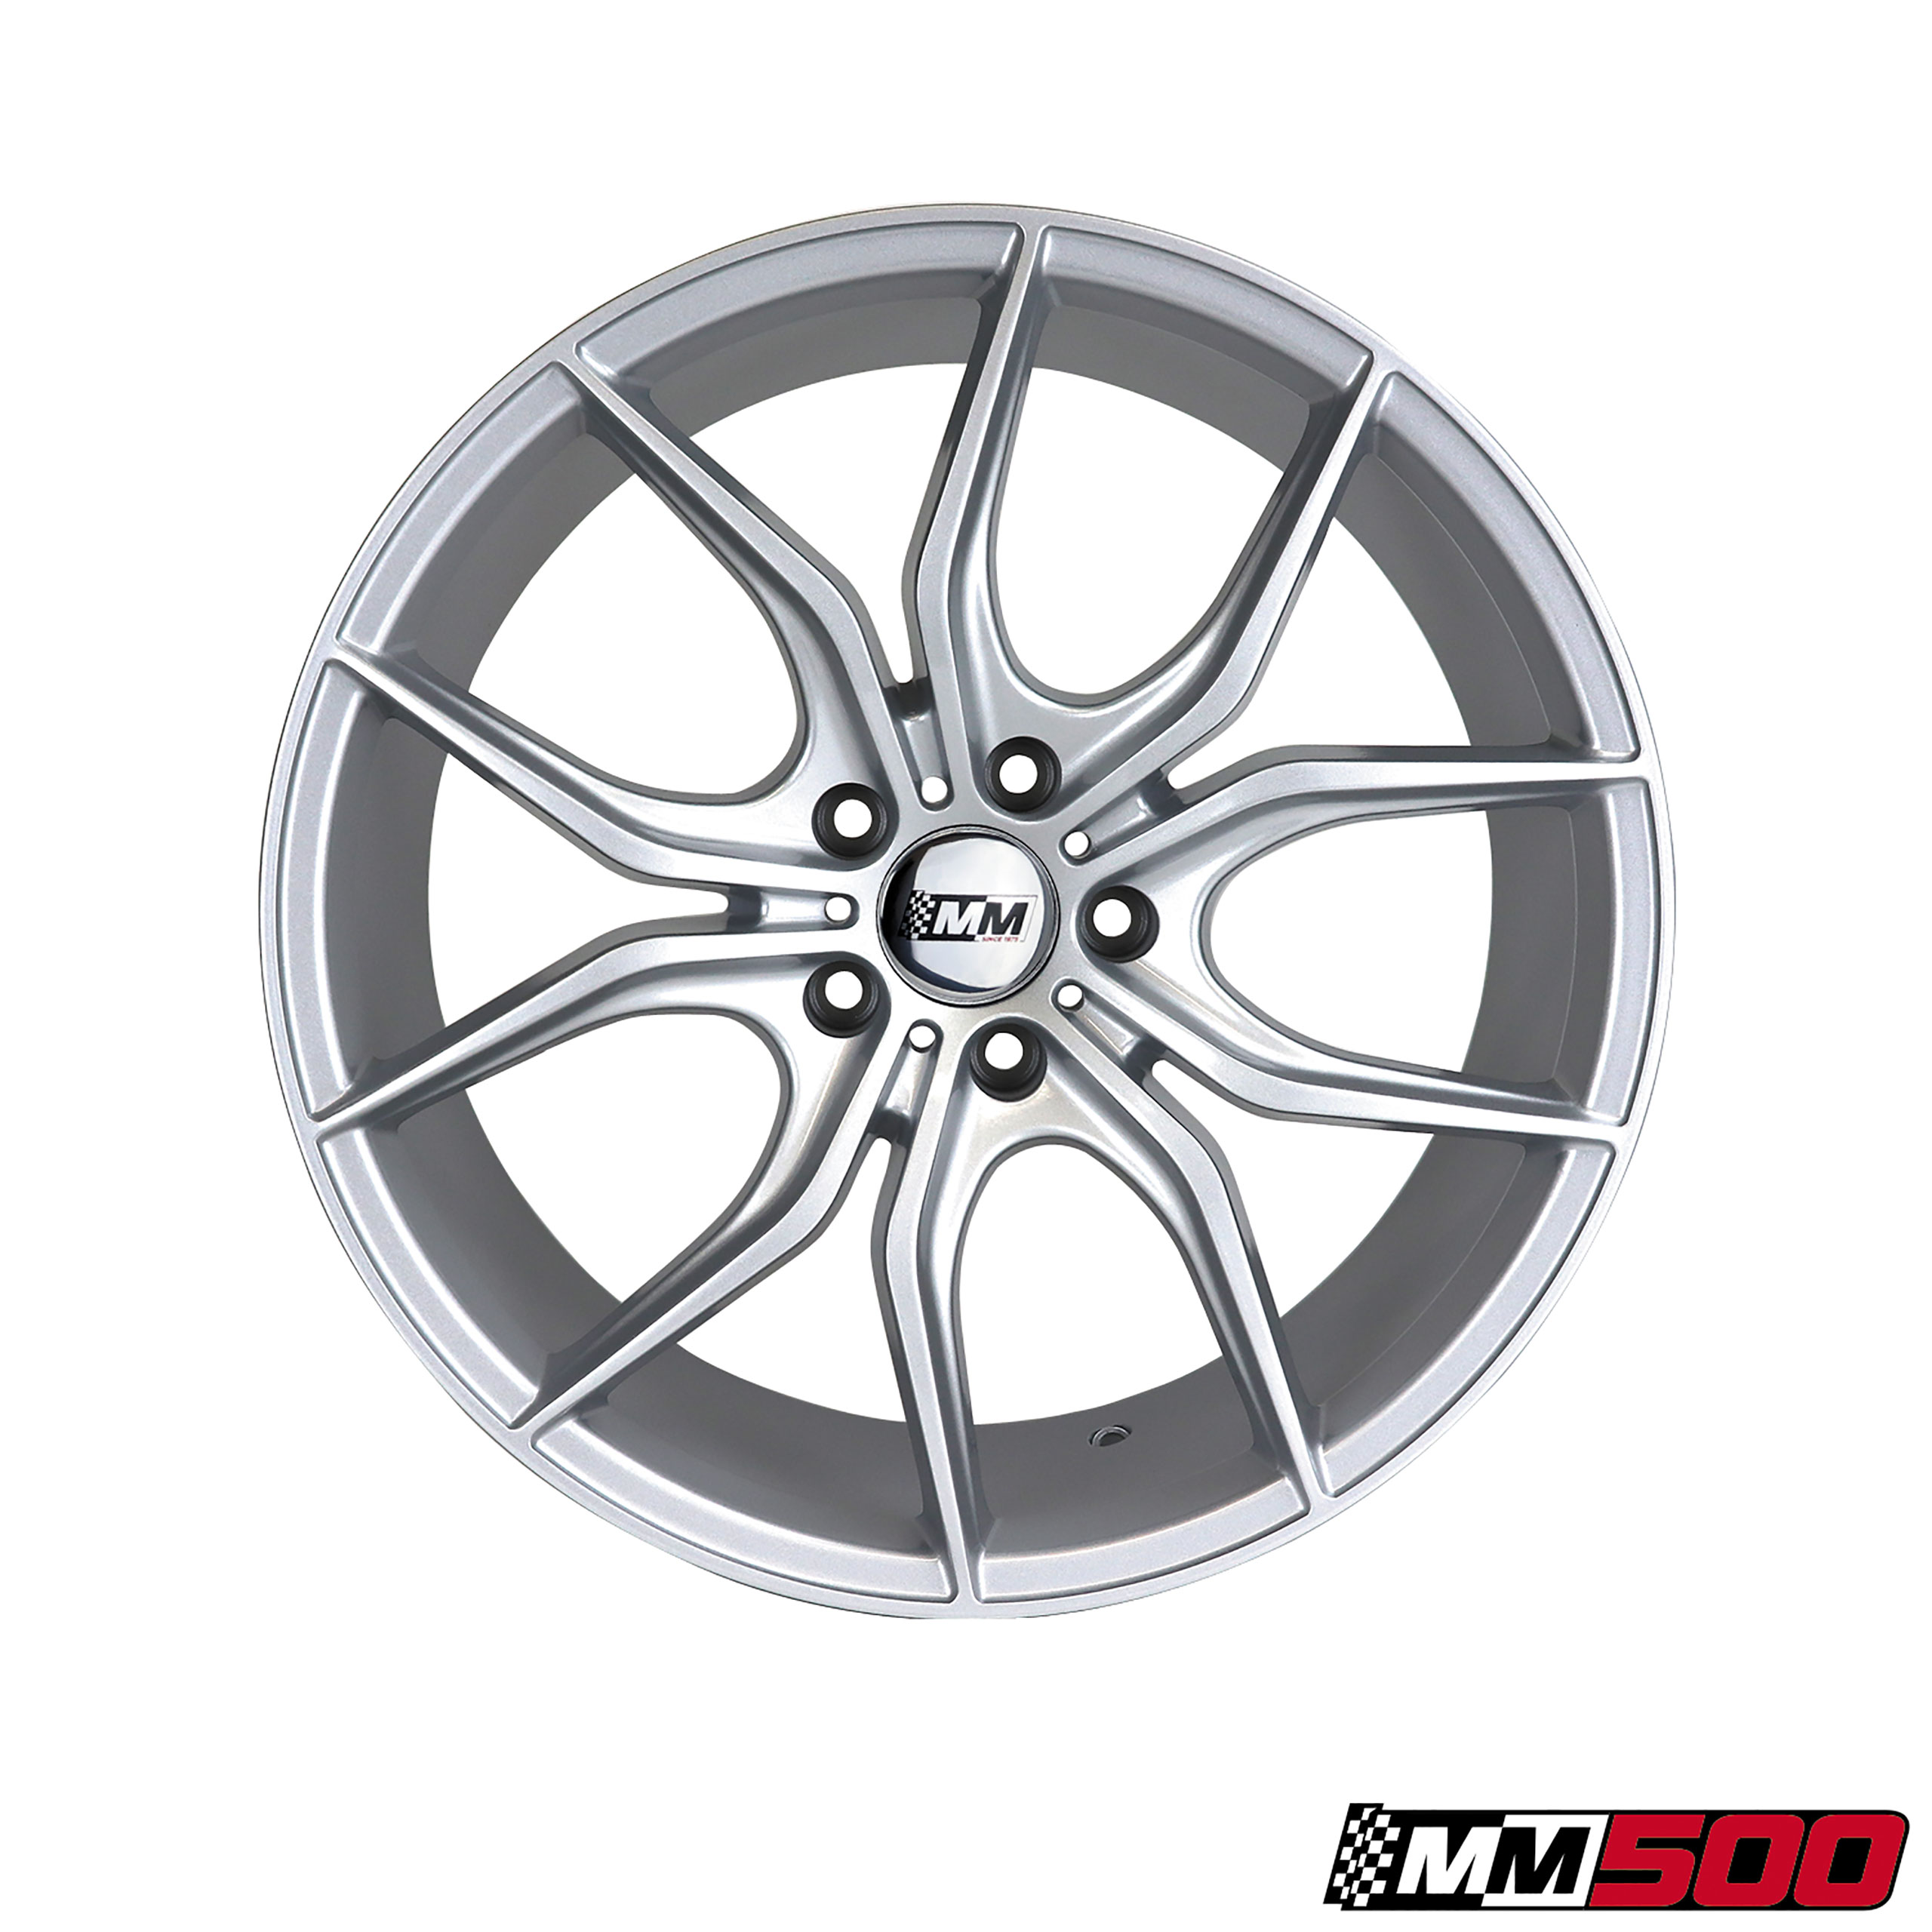 MM500 19x8-5 Wheel - Silver For 2005-2014 Ford Mustang